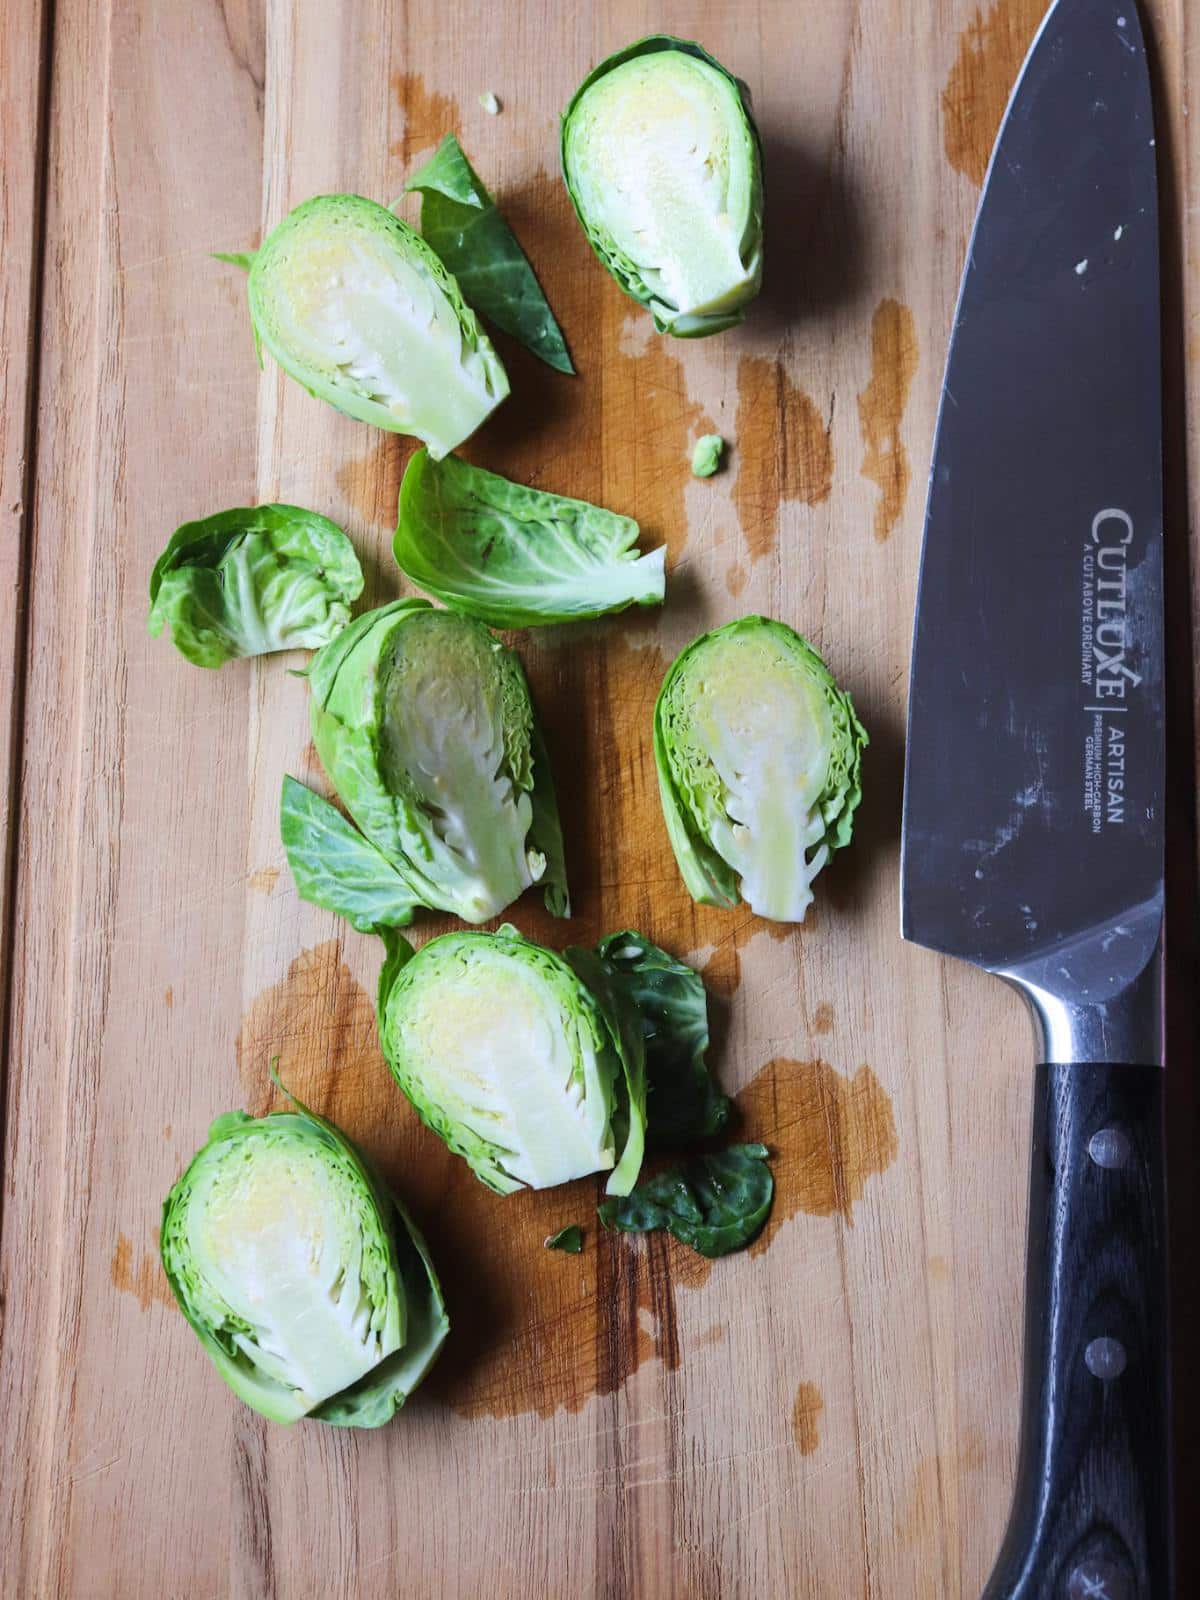 Brussels sprouts being cut in half on a wooden cutting board.